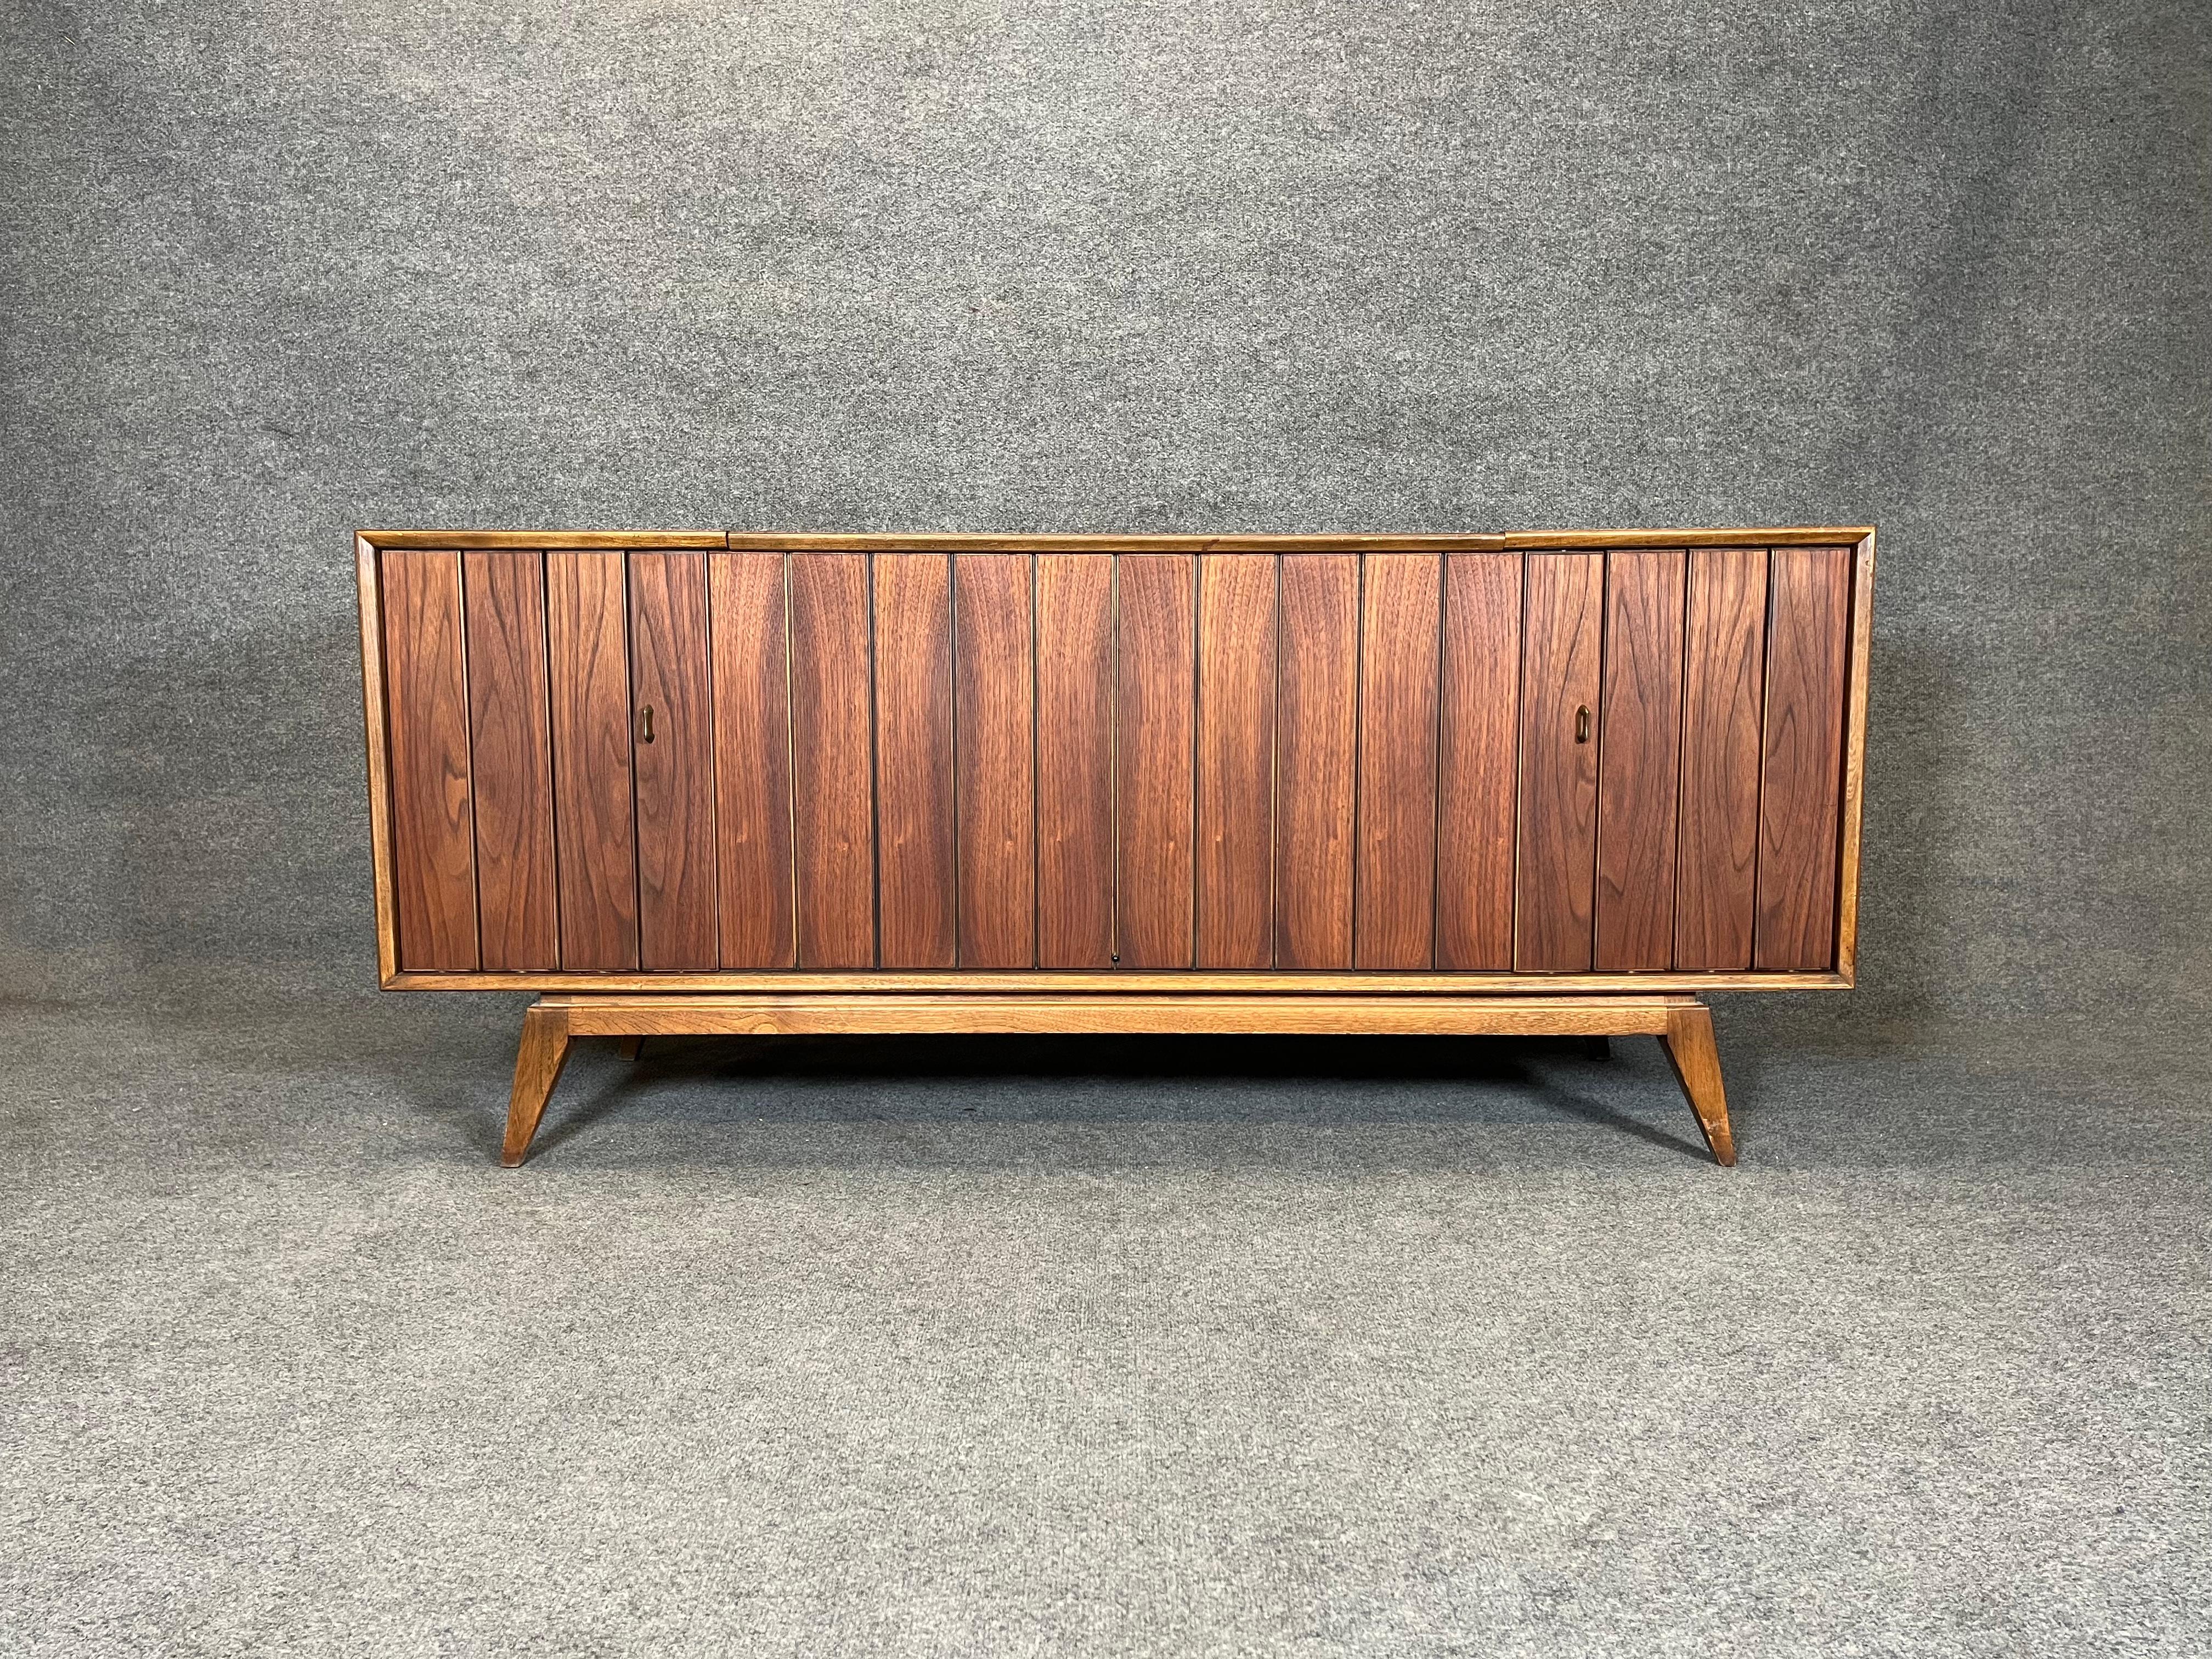 Here is a very sought after Mid century Zenith stereo console. Model Y960. The top, sides and front have been refinished. Made of walnut with a sculptural front. Louvered doors for the speakers. No rips or tears in the speaker cloth. The radio works